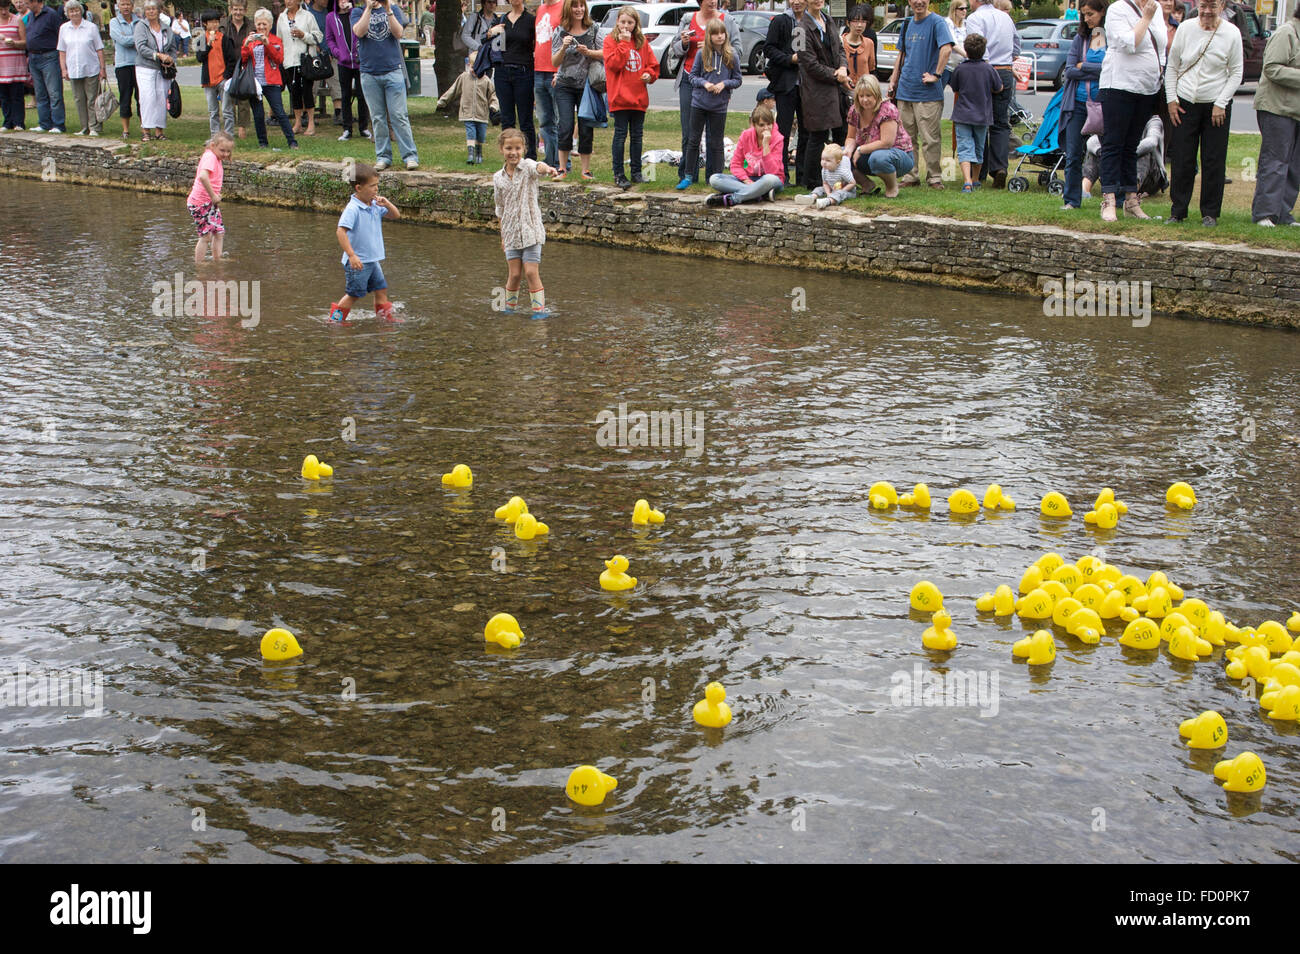 Duck-racing auf River bei Bourton-on-the-Water Cotswold Dorf, Gloucestershire, England Stockfoto